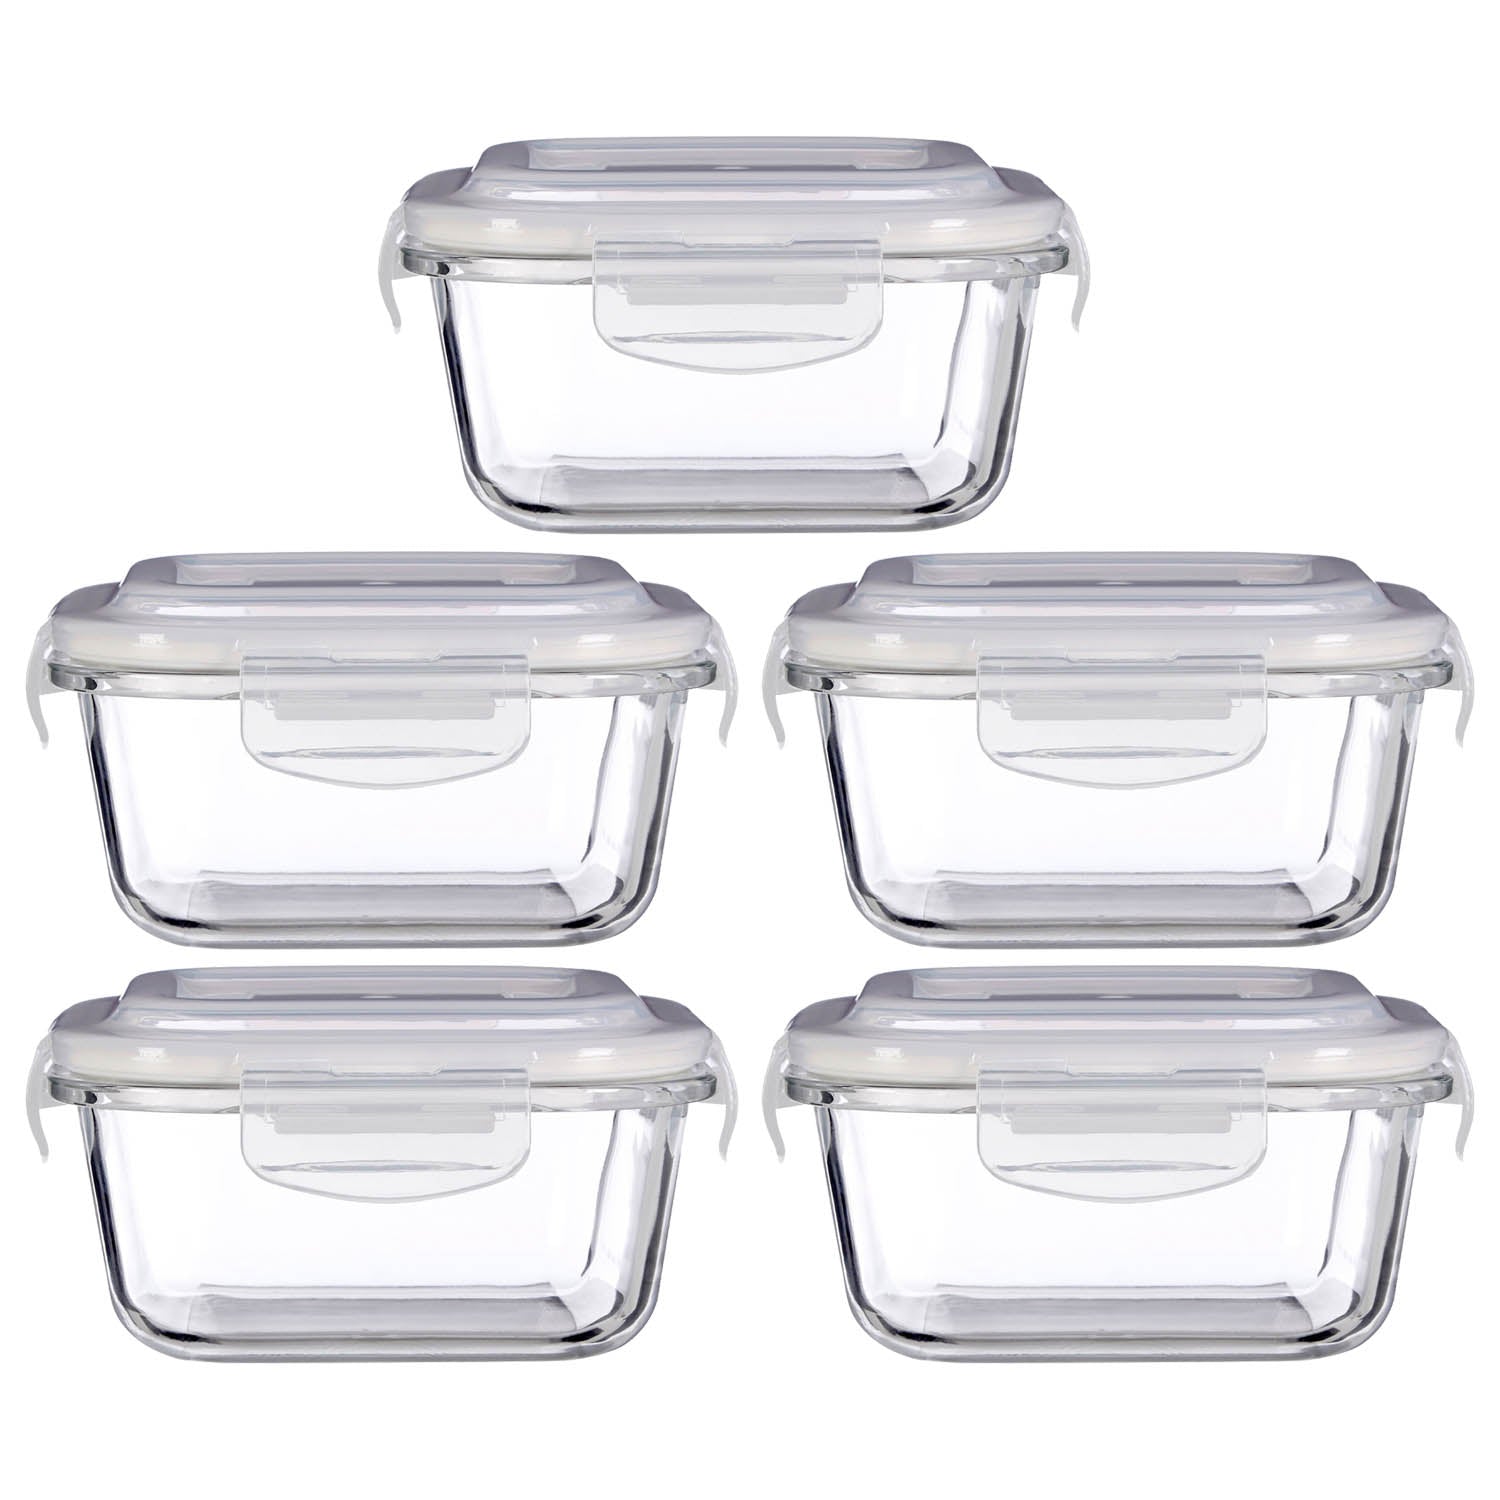 Set of 5 Freska 520ml Glass Food Container